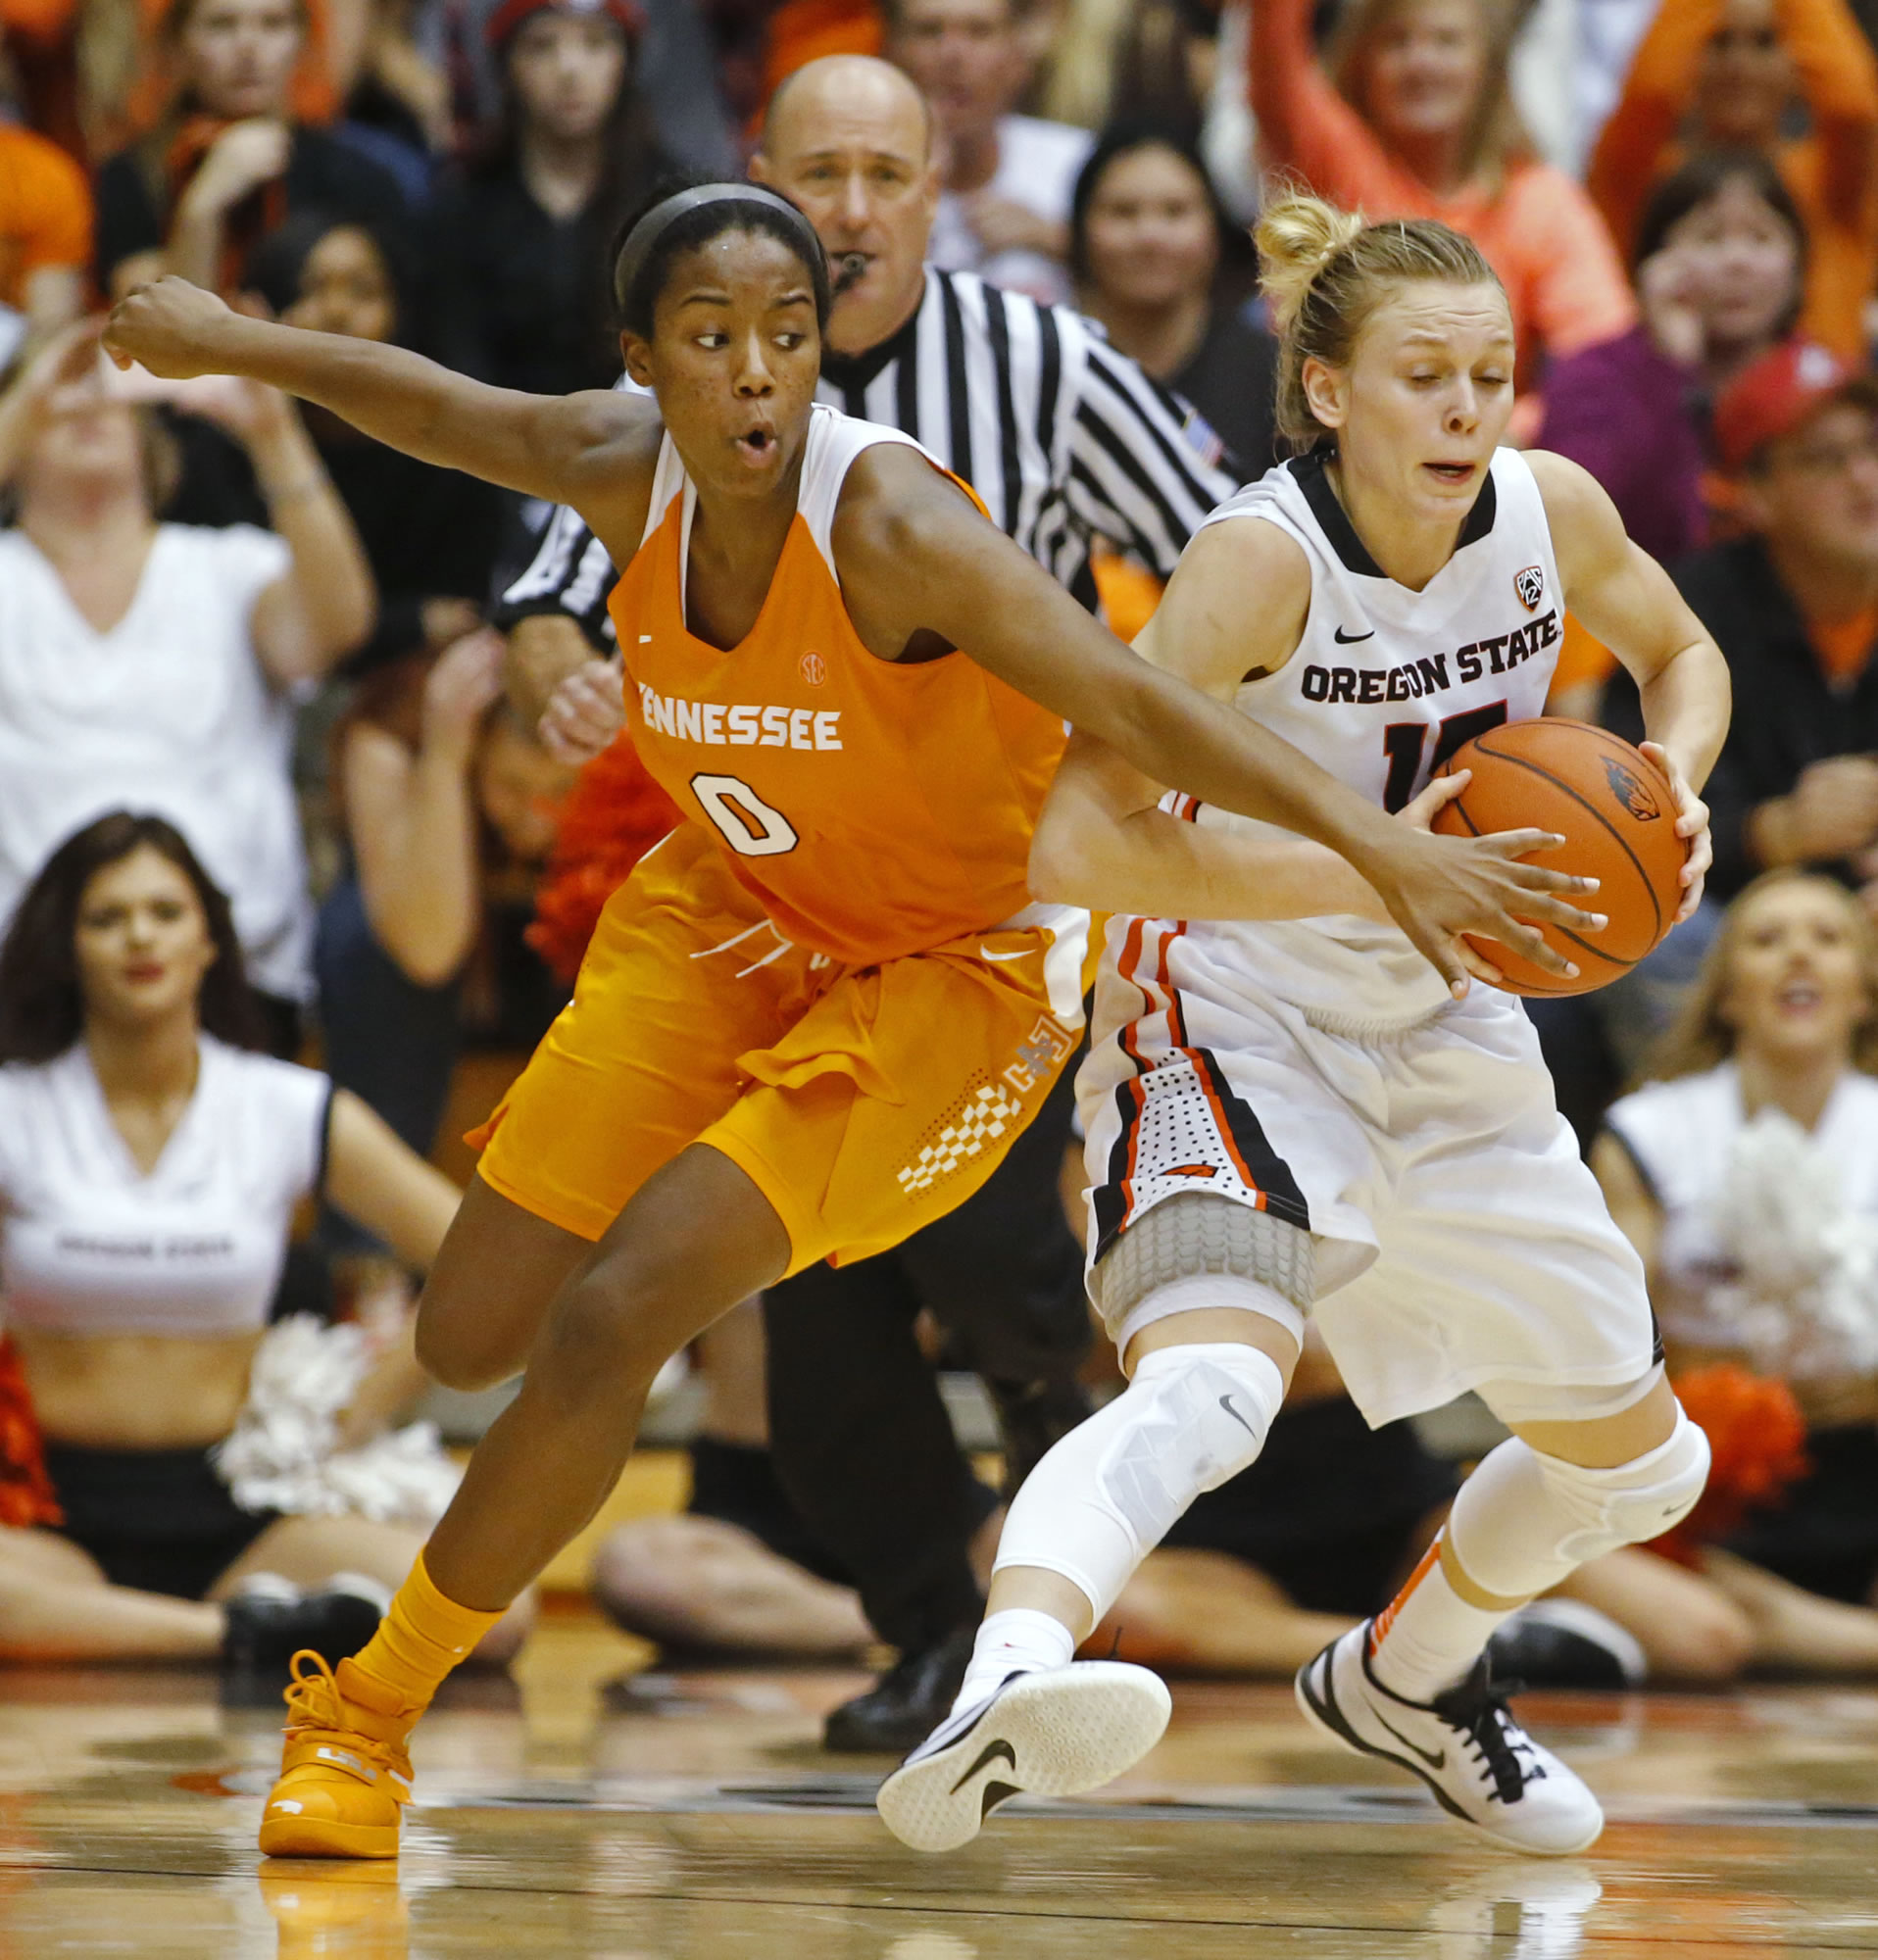 Oregon State's Jamie Weisner, right, protects the ball from Tennessee's Jordan Reynolds during the second half of an NCAA college basketball game in Corvallis, Ore., on Saturday, Dec. 19, 2015. Tennessee won 53-50. (AP Photo/Timothy J.